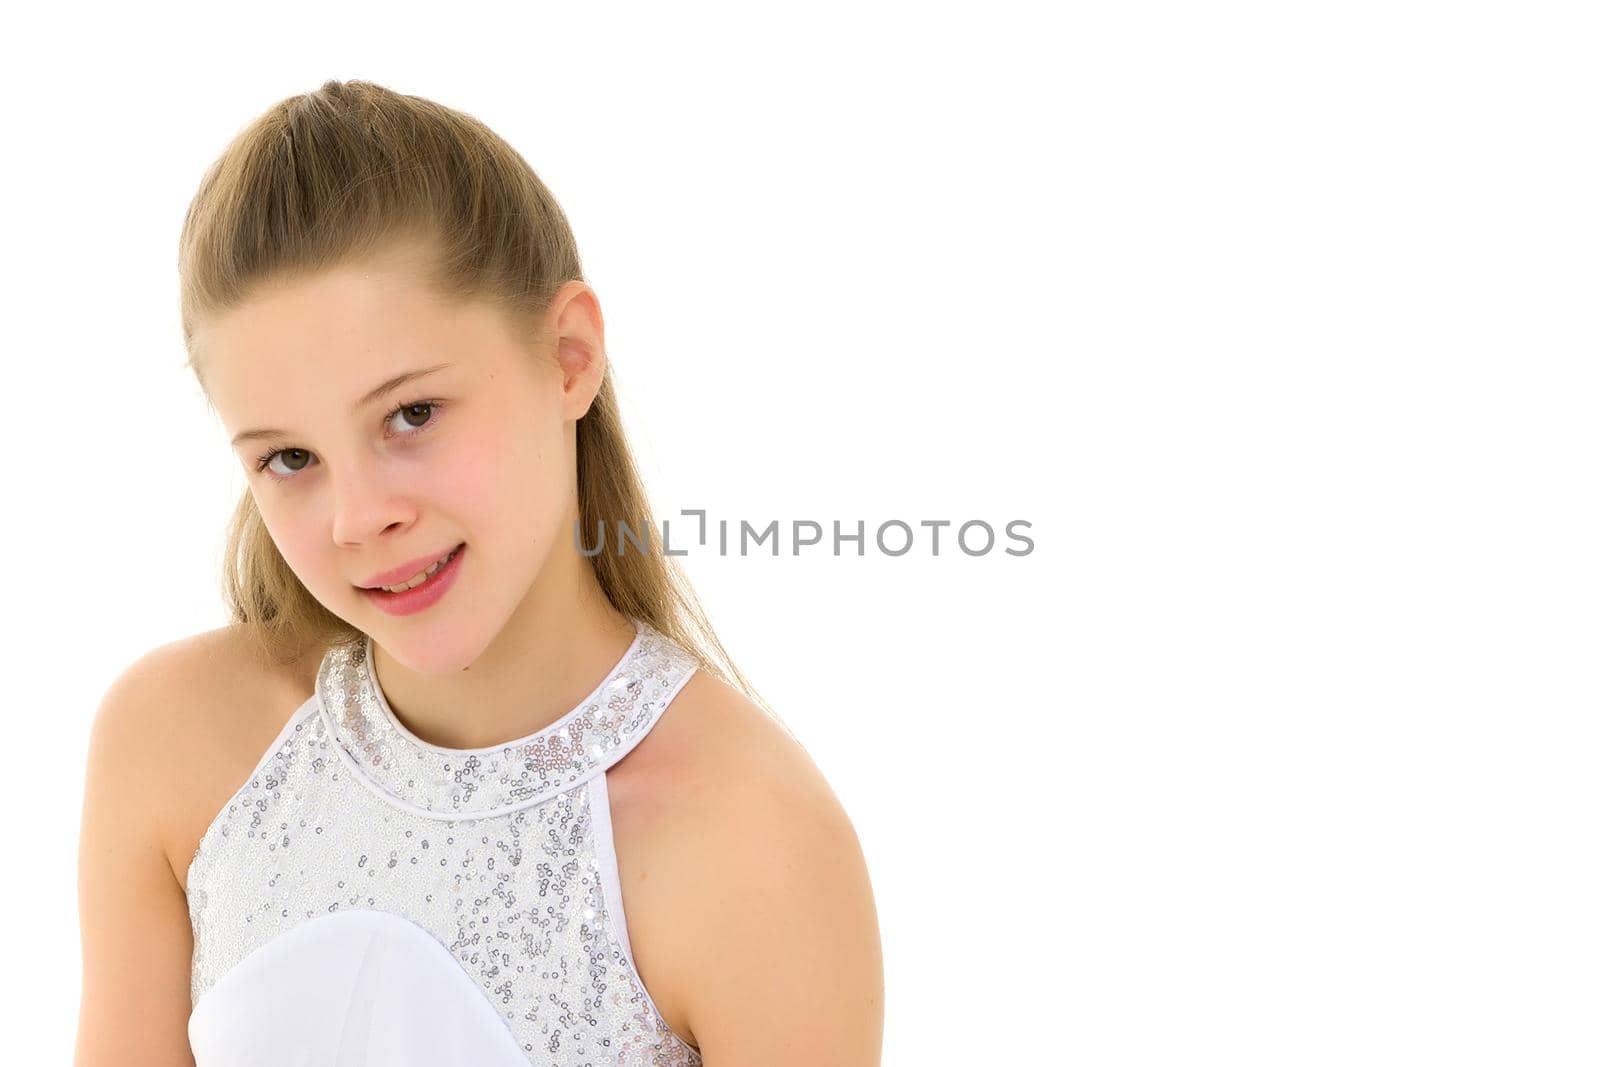 Beautiful little girl close-up. The concept of beauty and fashion, happy childhood. Isolated on white background.